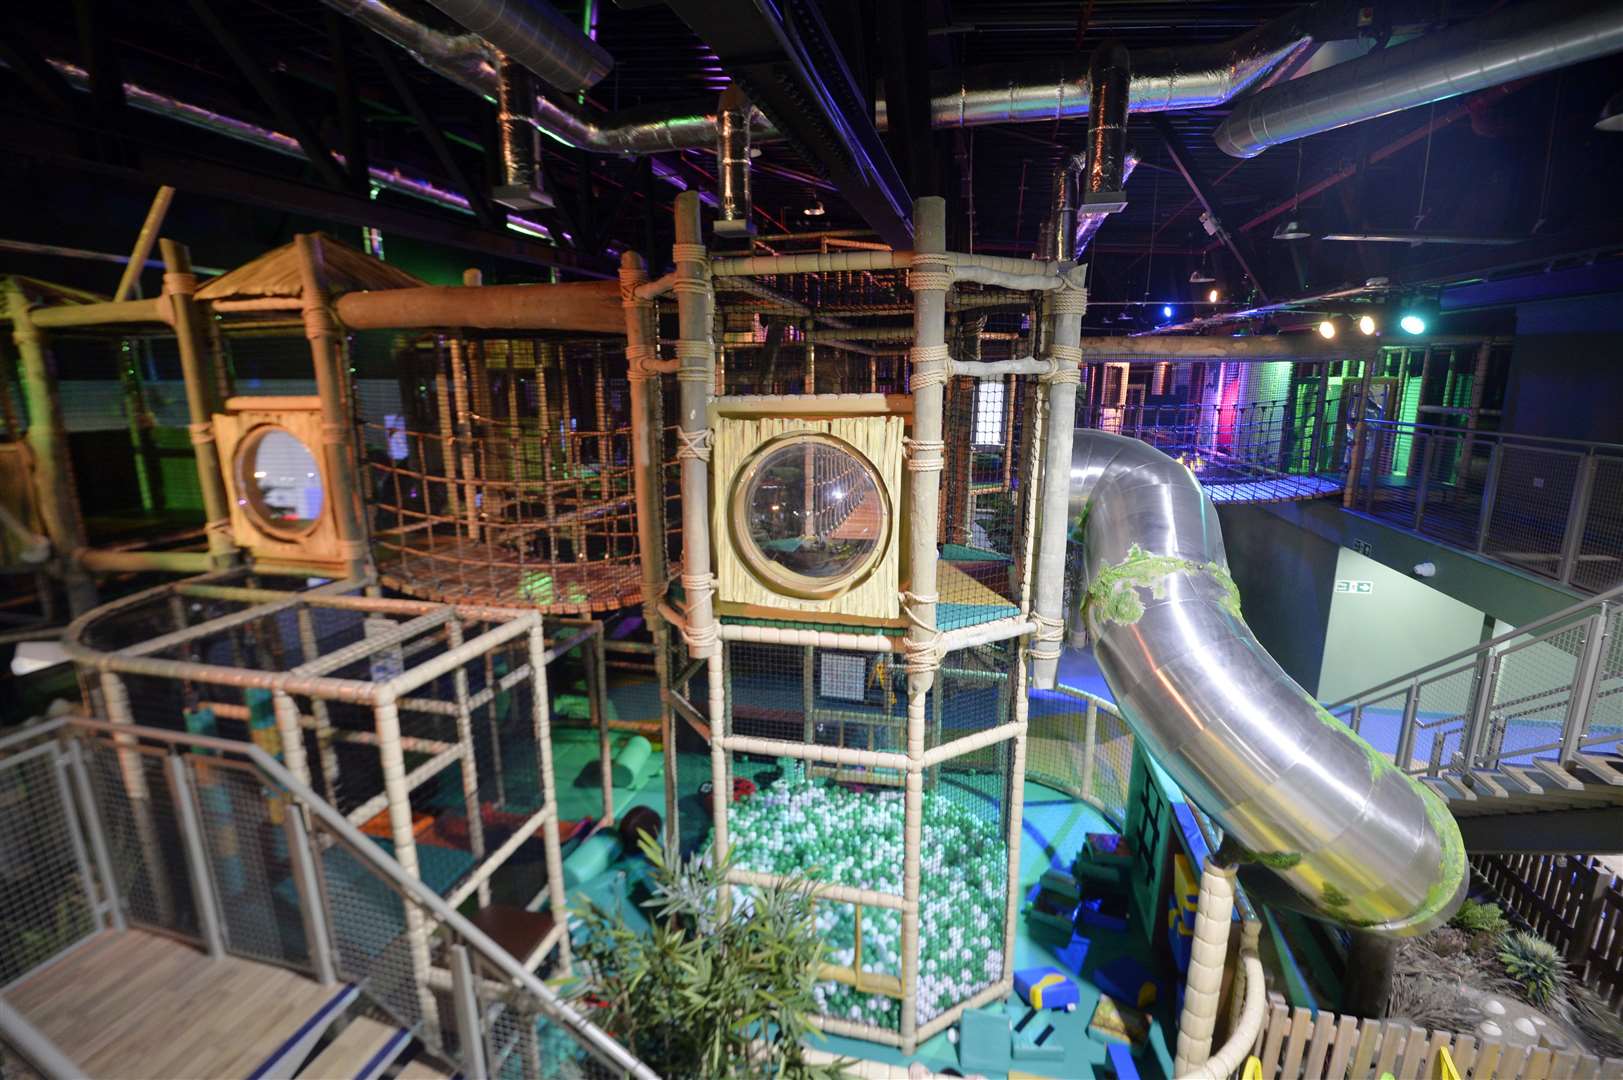 Seek out the dinosaurs in three storeys of soft play